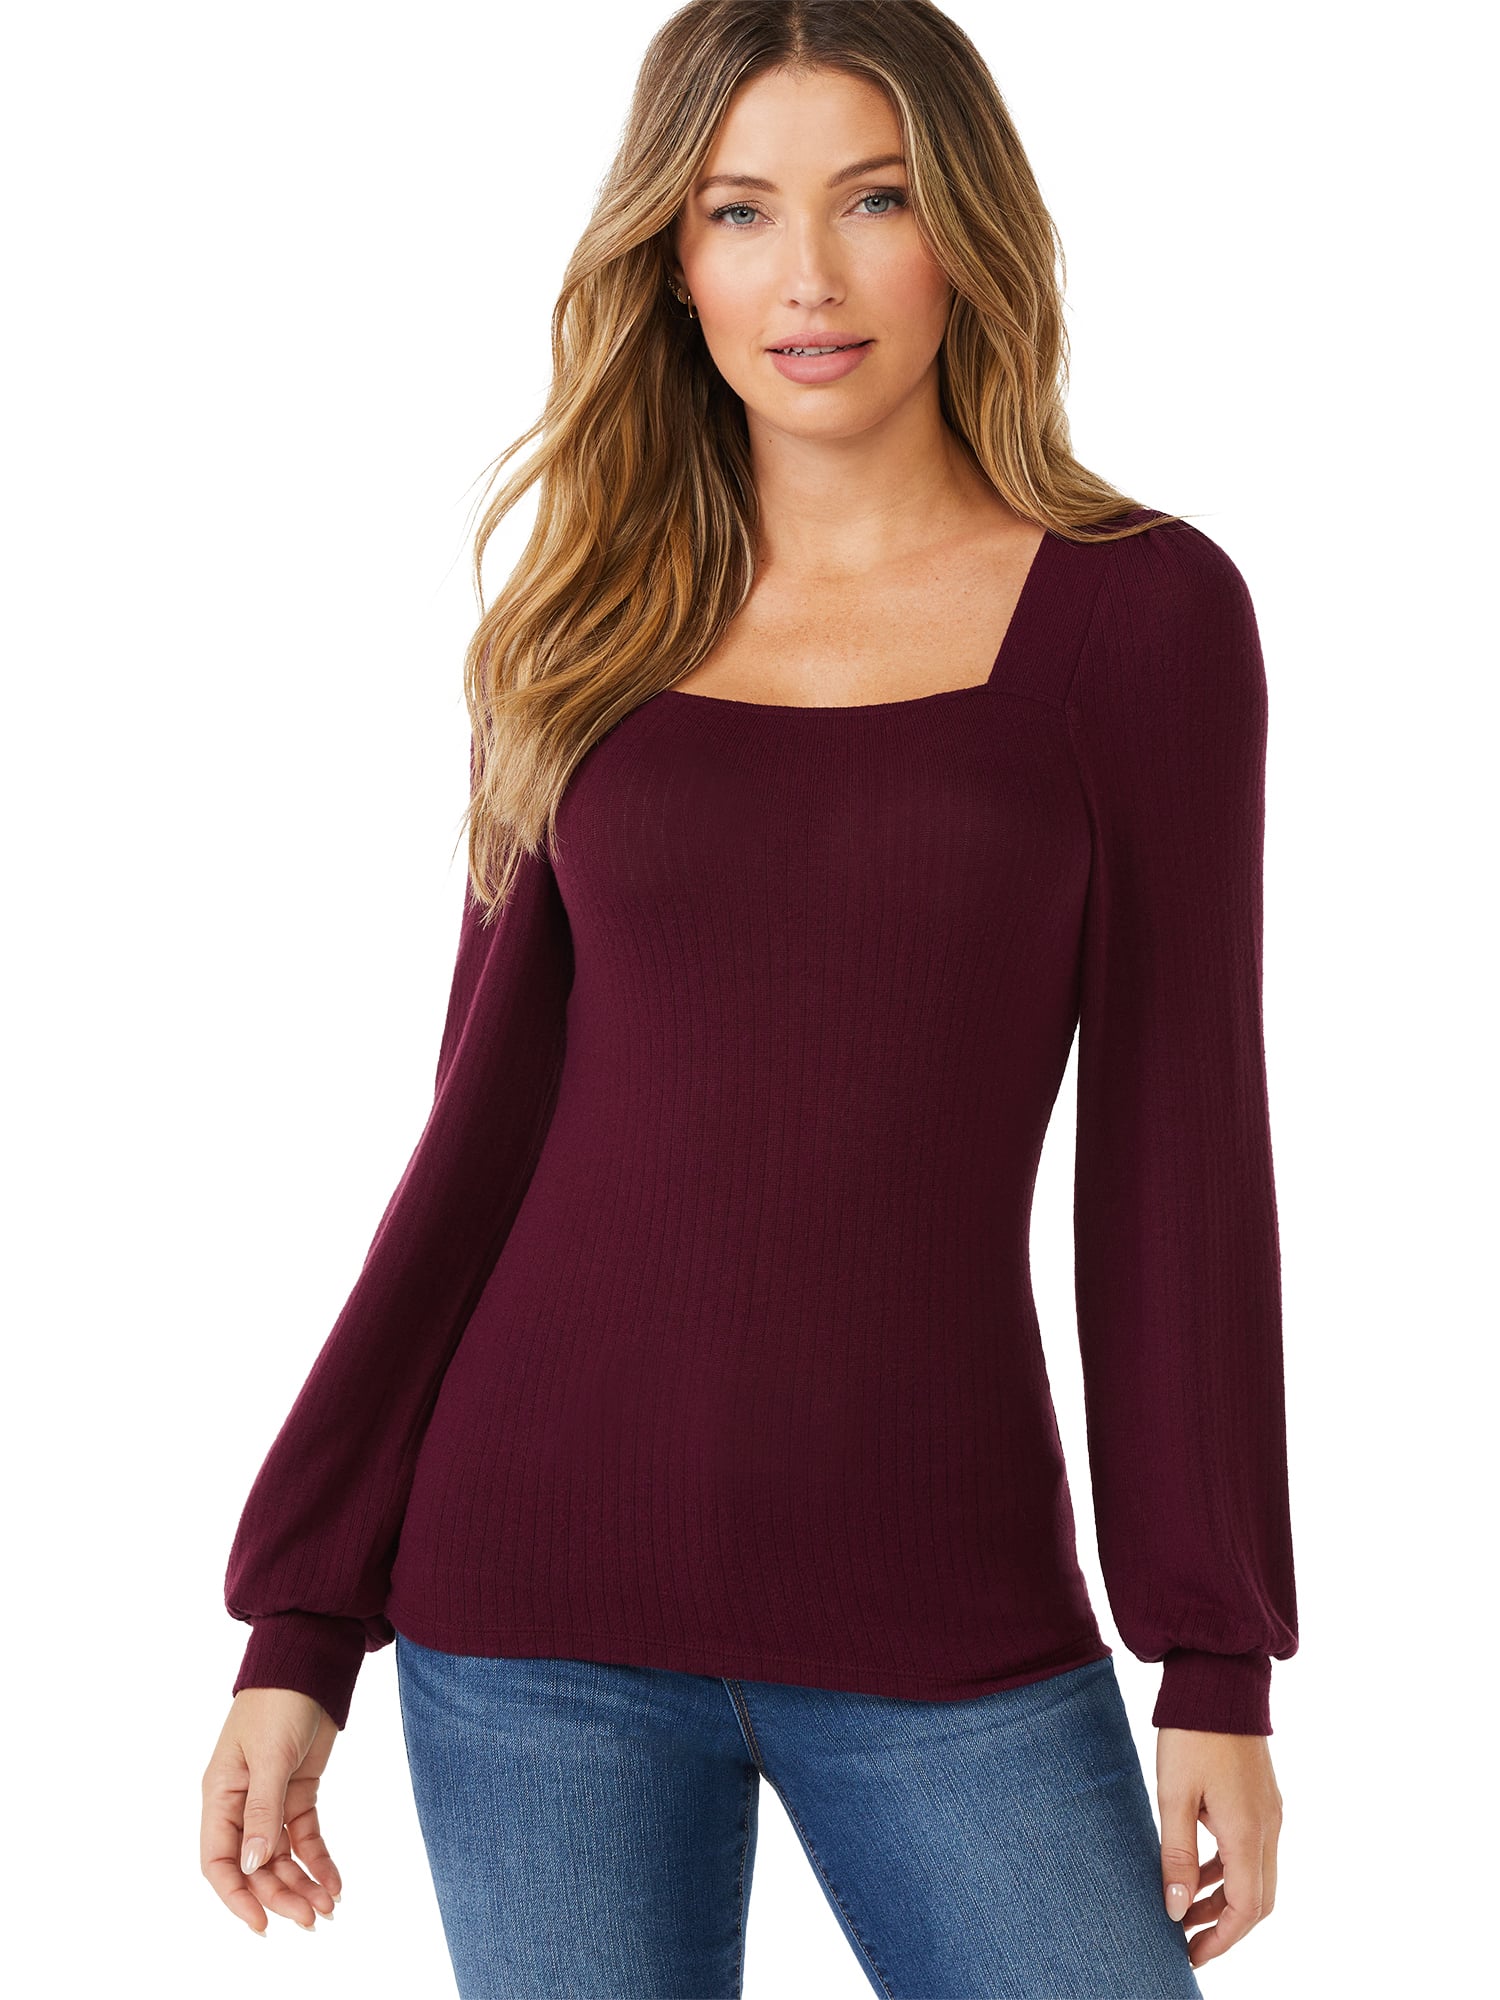 Sofia Jeans by Sofia Vergara Women's Cosy Square Neck Top, 10 New Walmart  Finds a Fashion Writer Can't Stop Thinking About